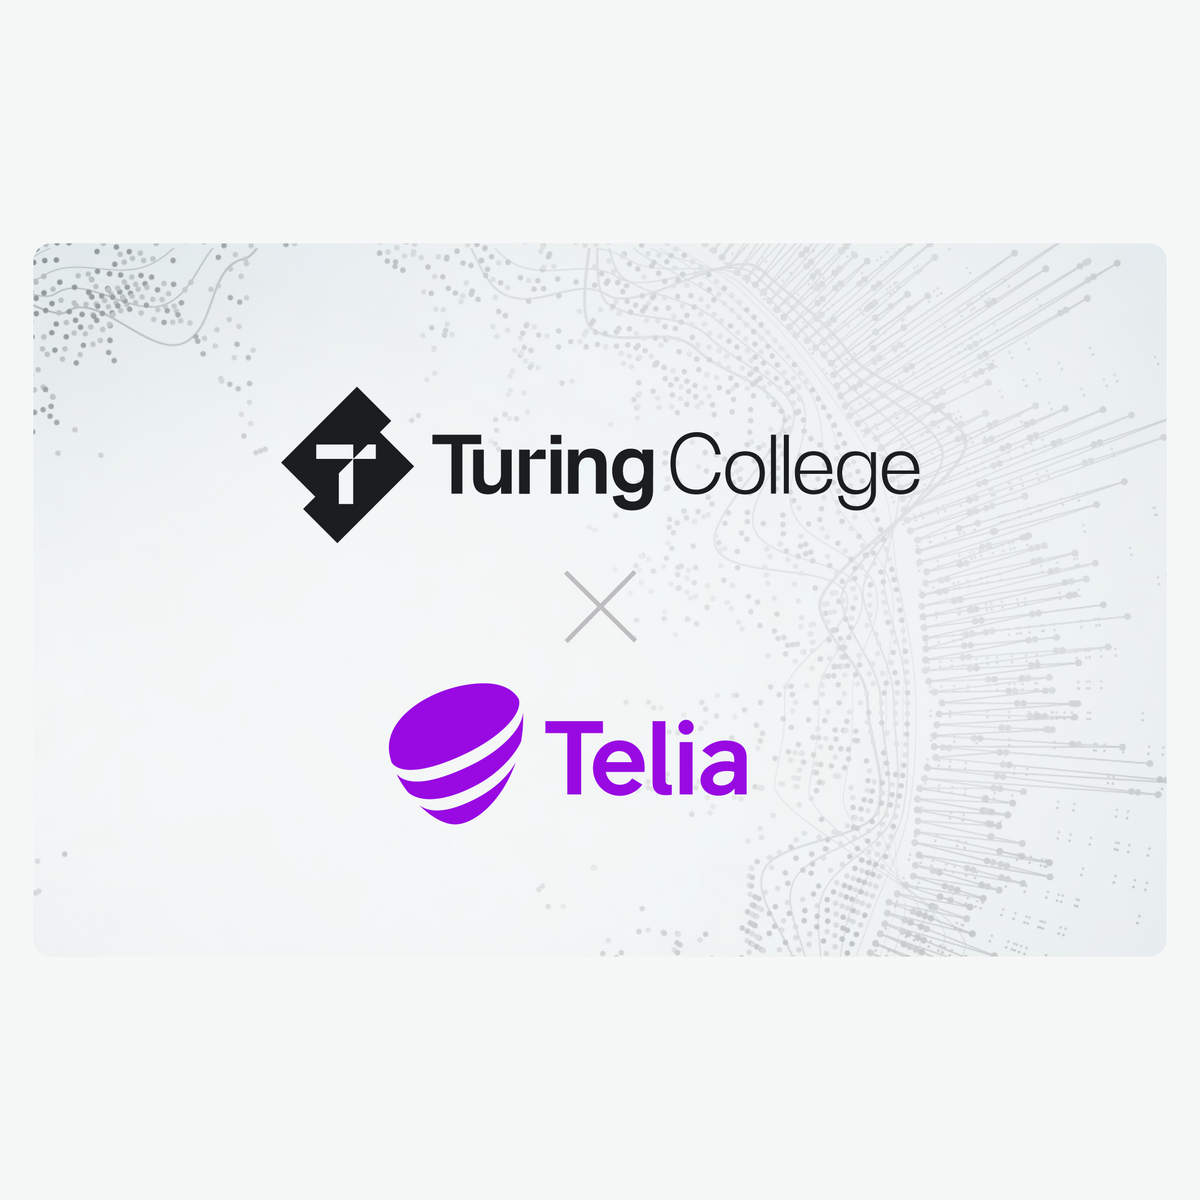 Telia partners with Turing College to prepare data professionals in telecom